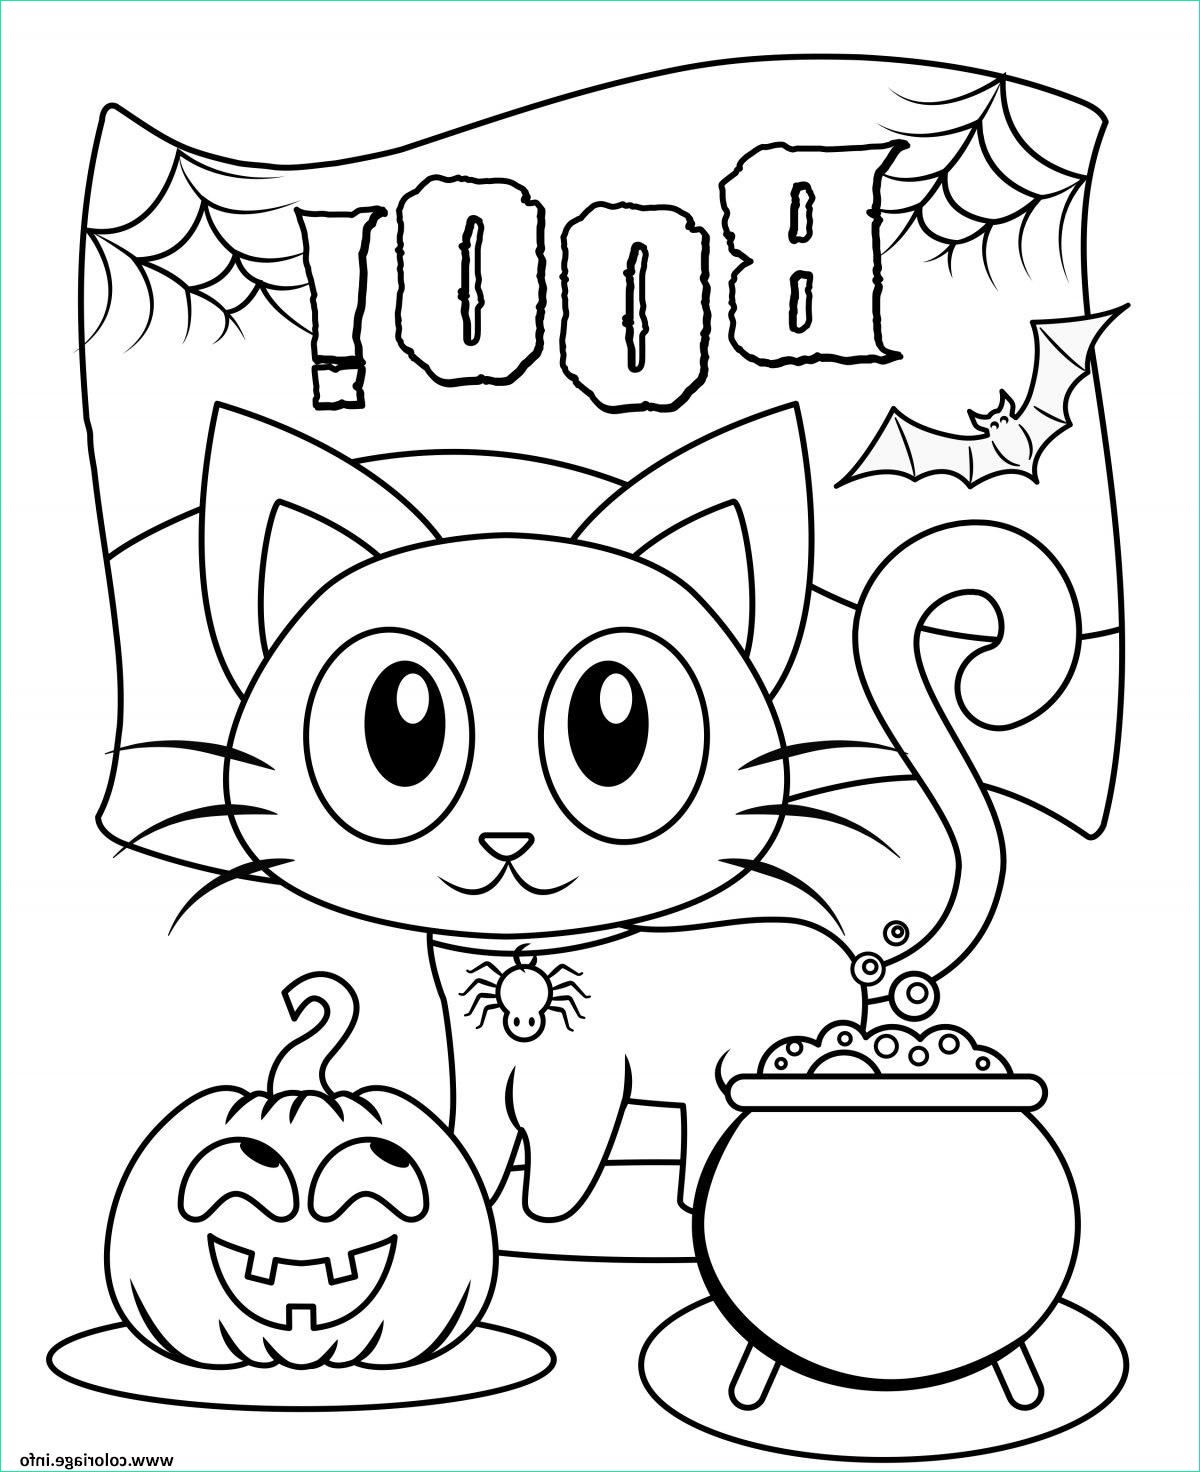 Chat Halloween Dessin Impressionnant Stock Coloriage Halloween Boo Chat Noir Citrouille Dessin